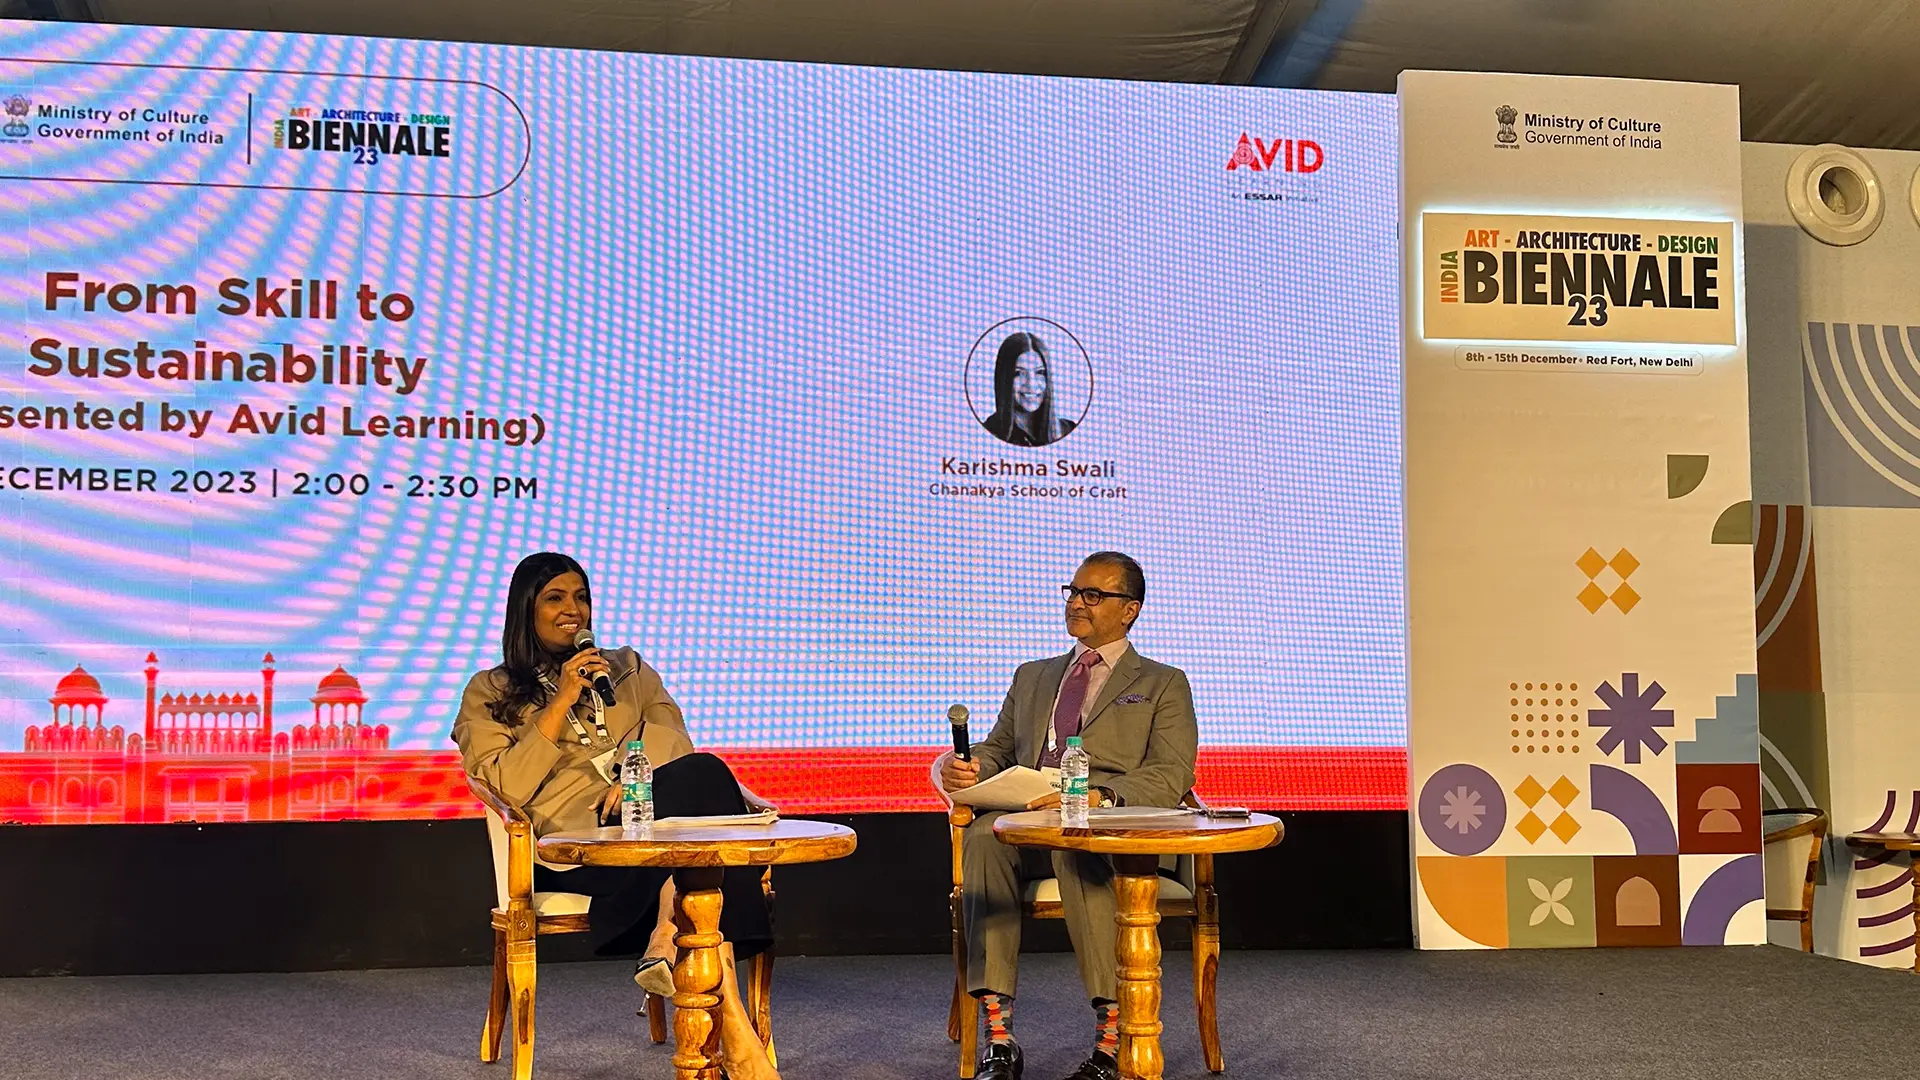 Avid Learning Collaborates as a Knowledge Partner with the Ministry of Culture for the Inaugural India Art, Architecture and Design Biennale (IAADB’23)